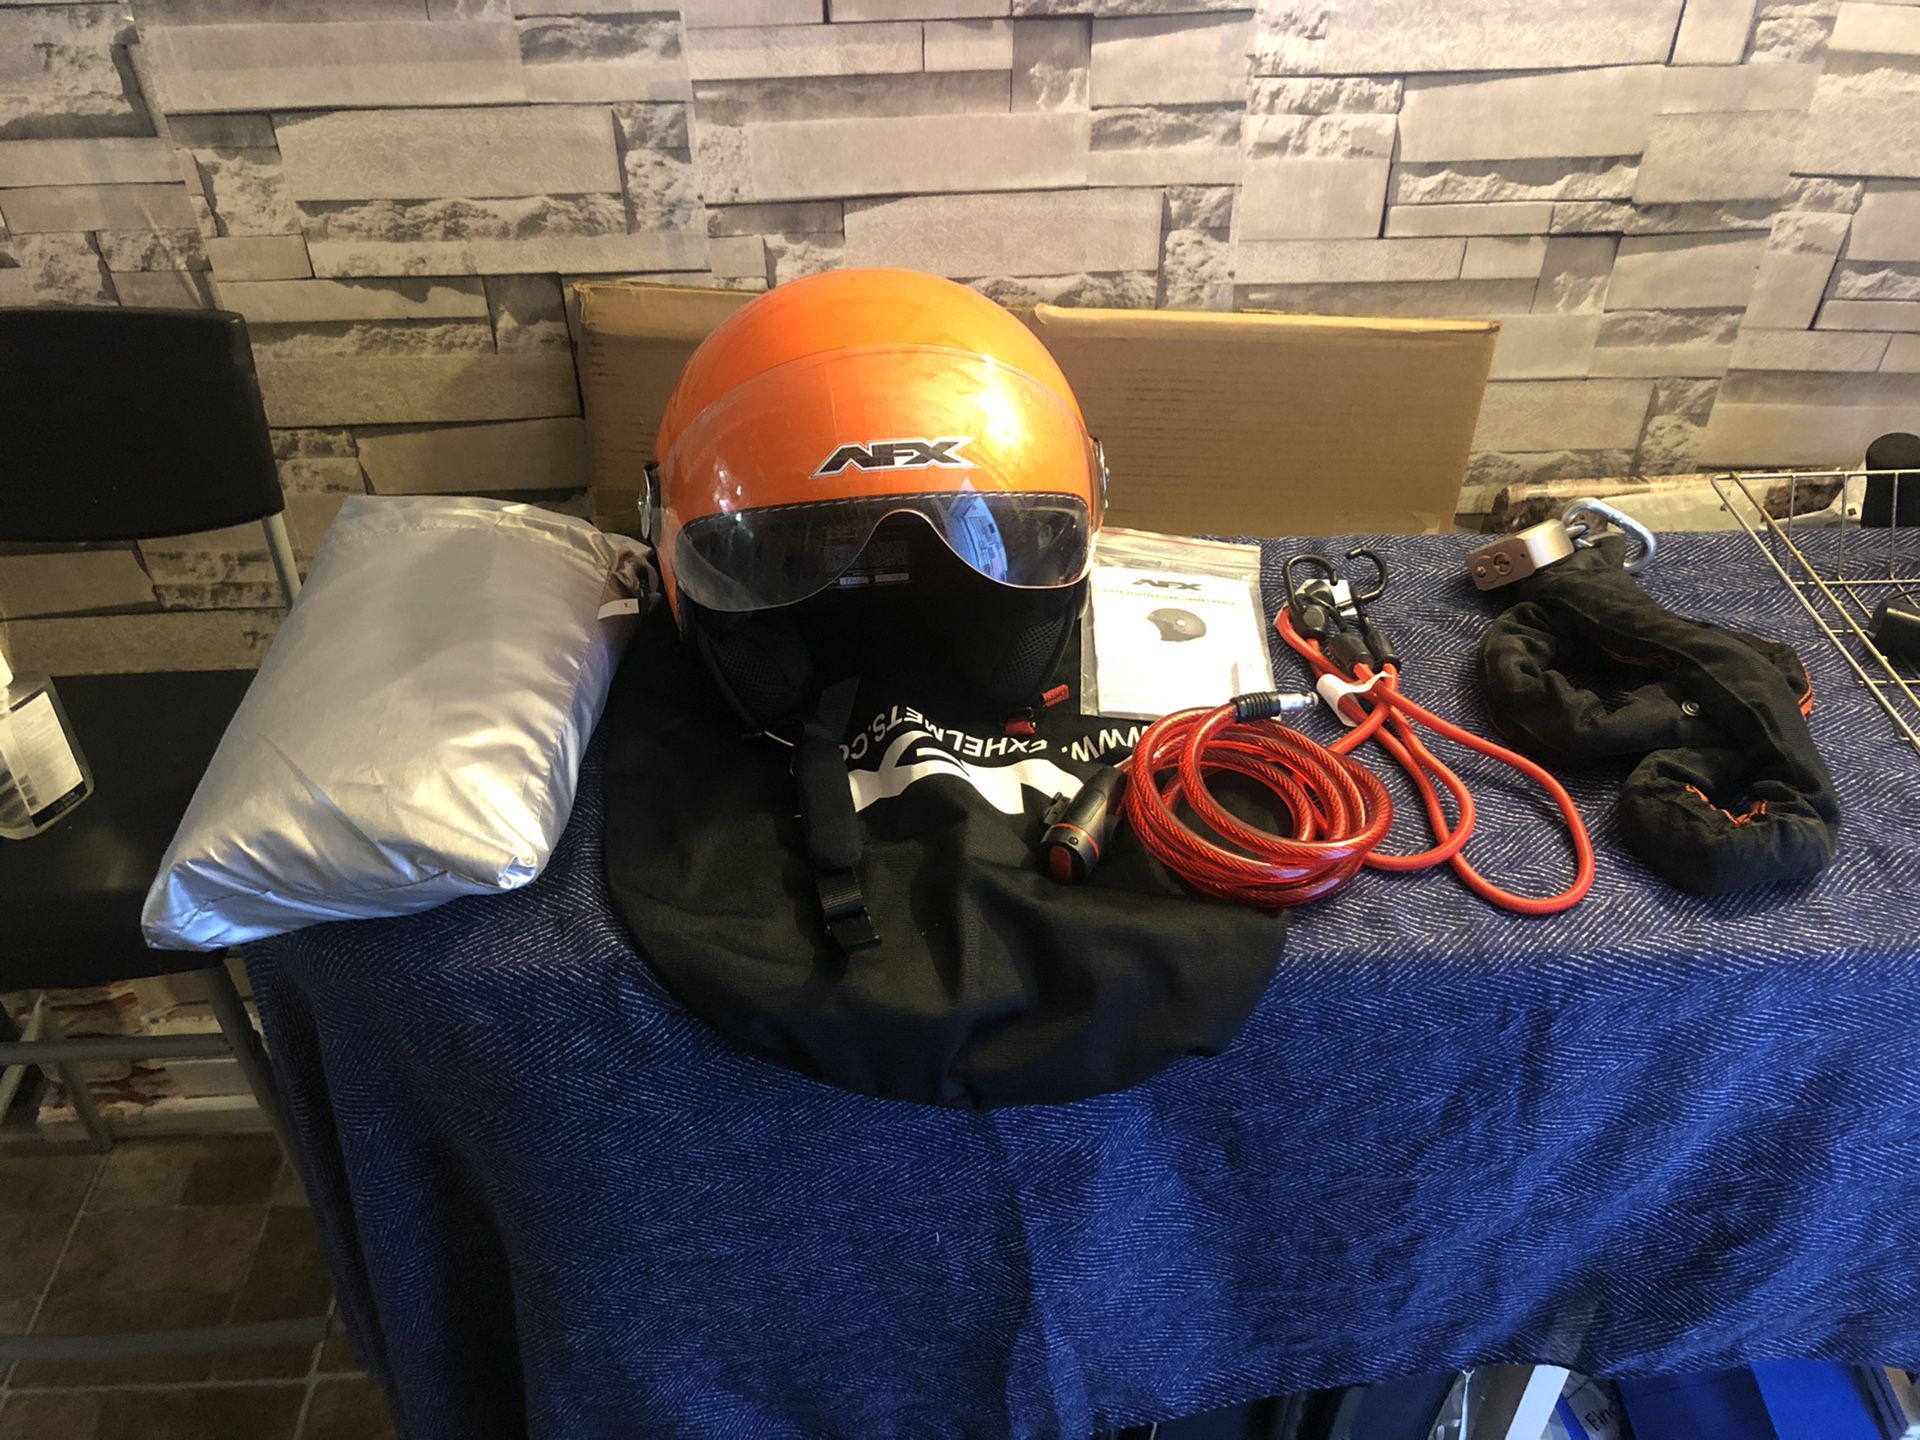 Accessories for motorcycle